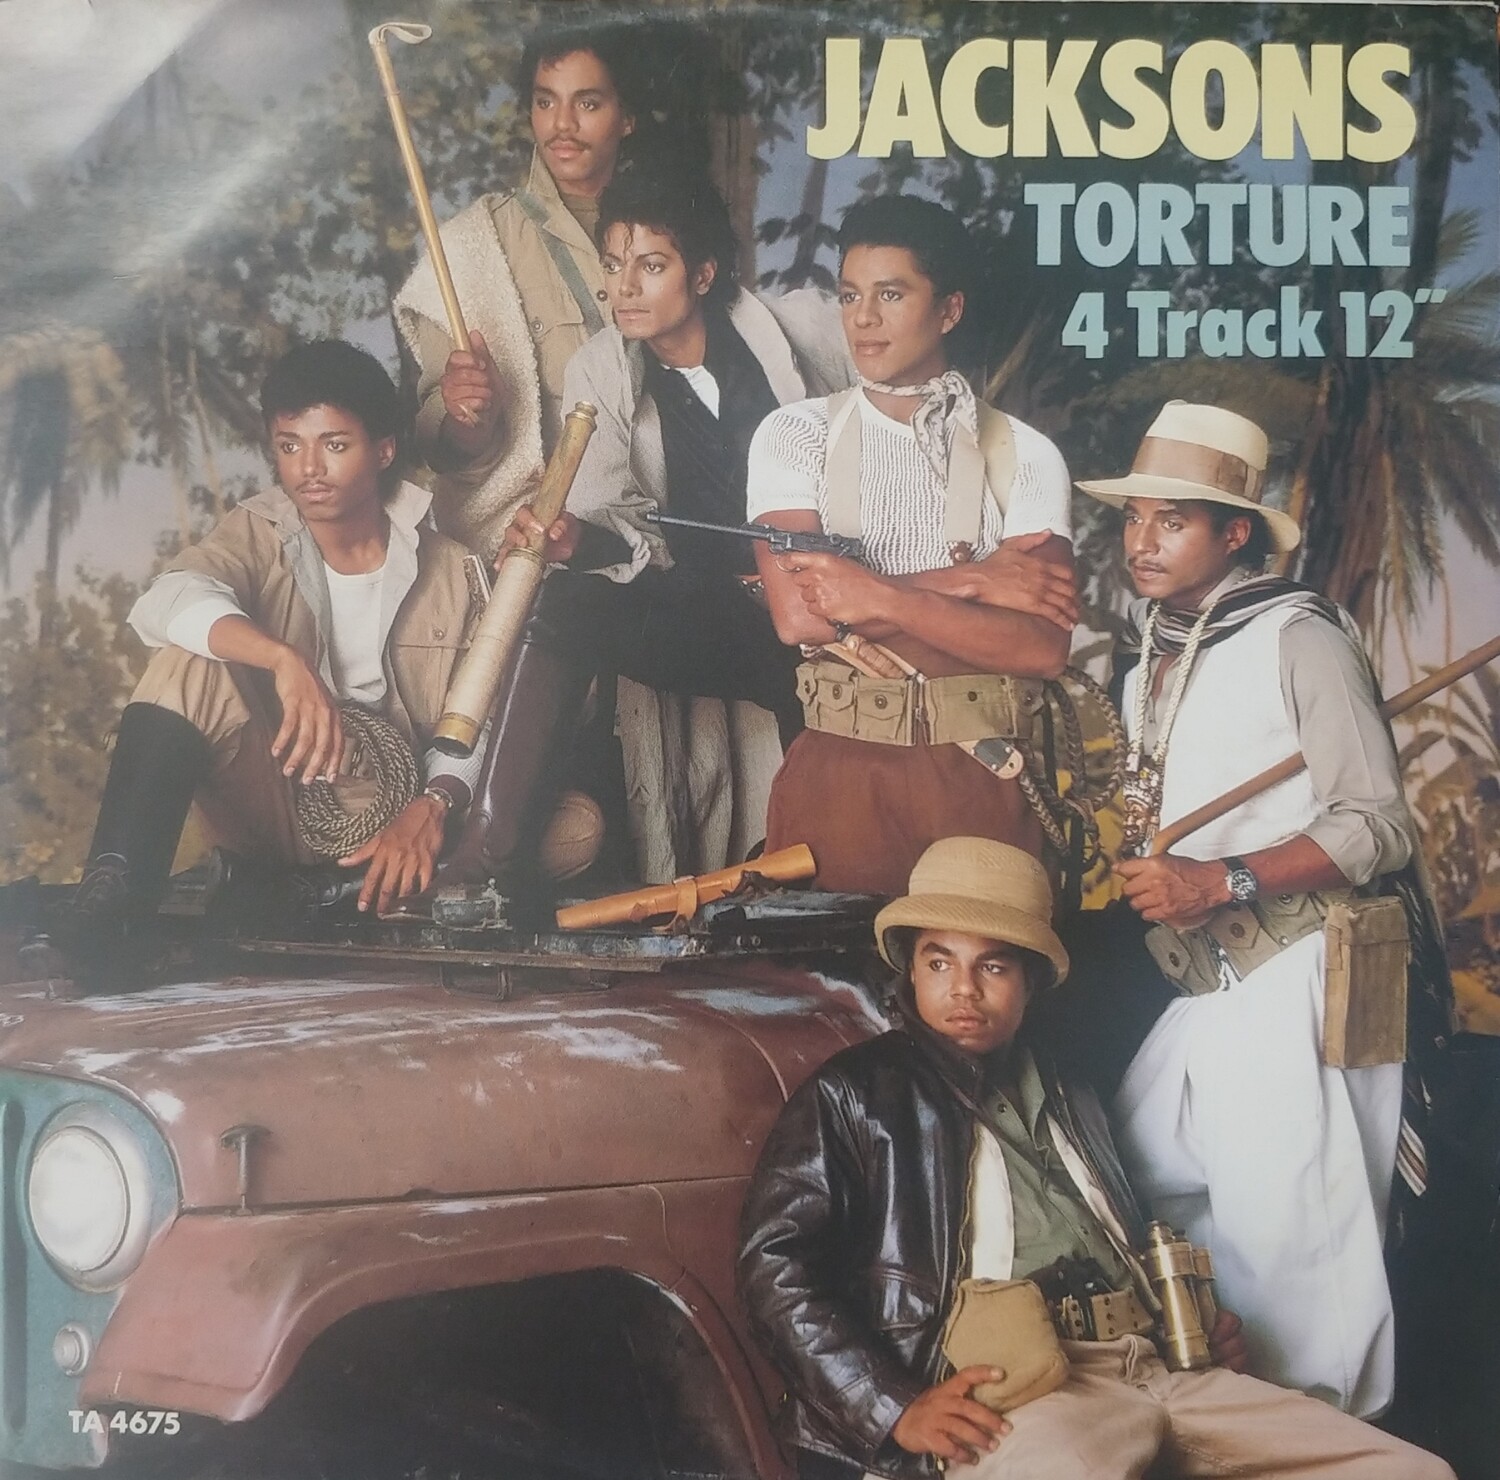 The Jacksons - Torture (MAXI)